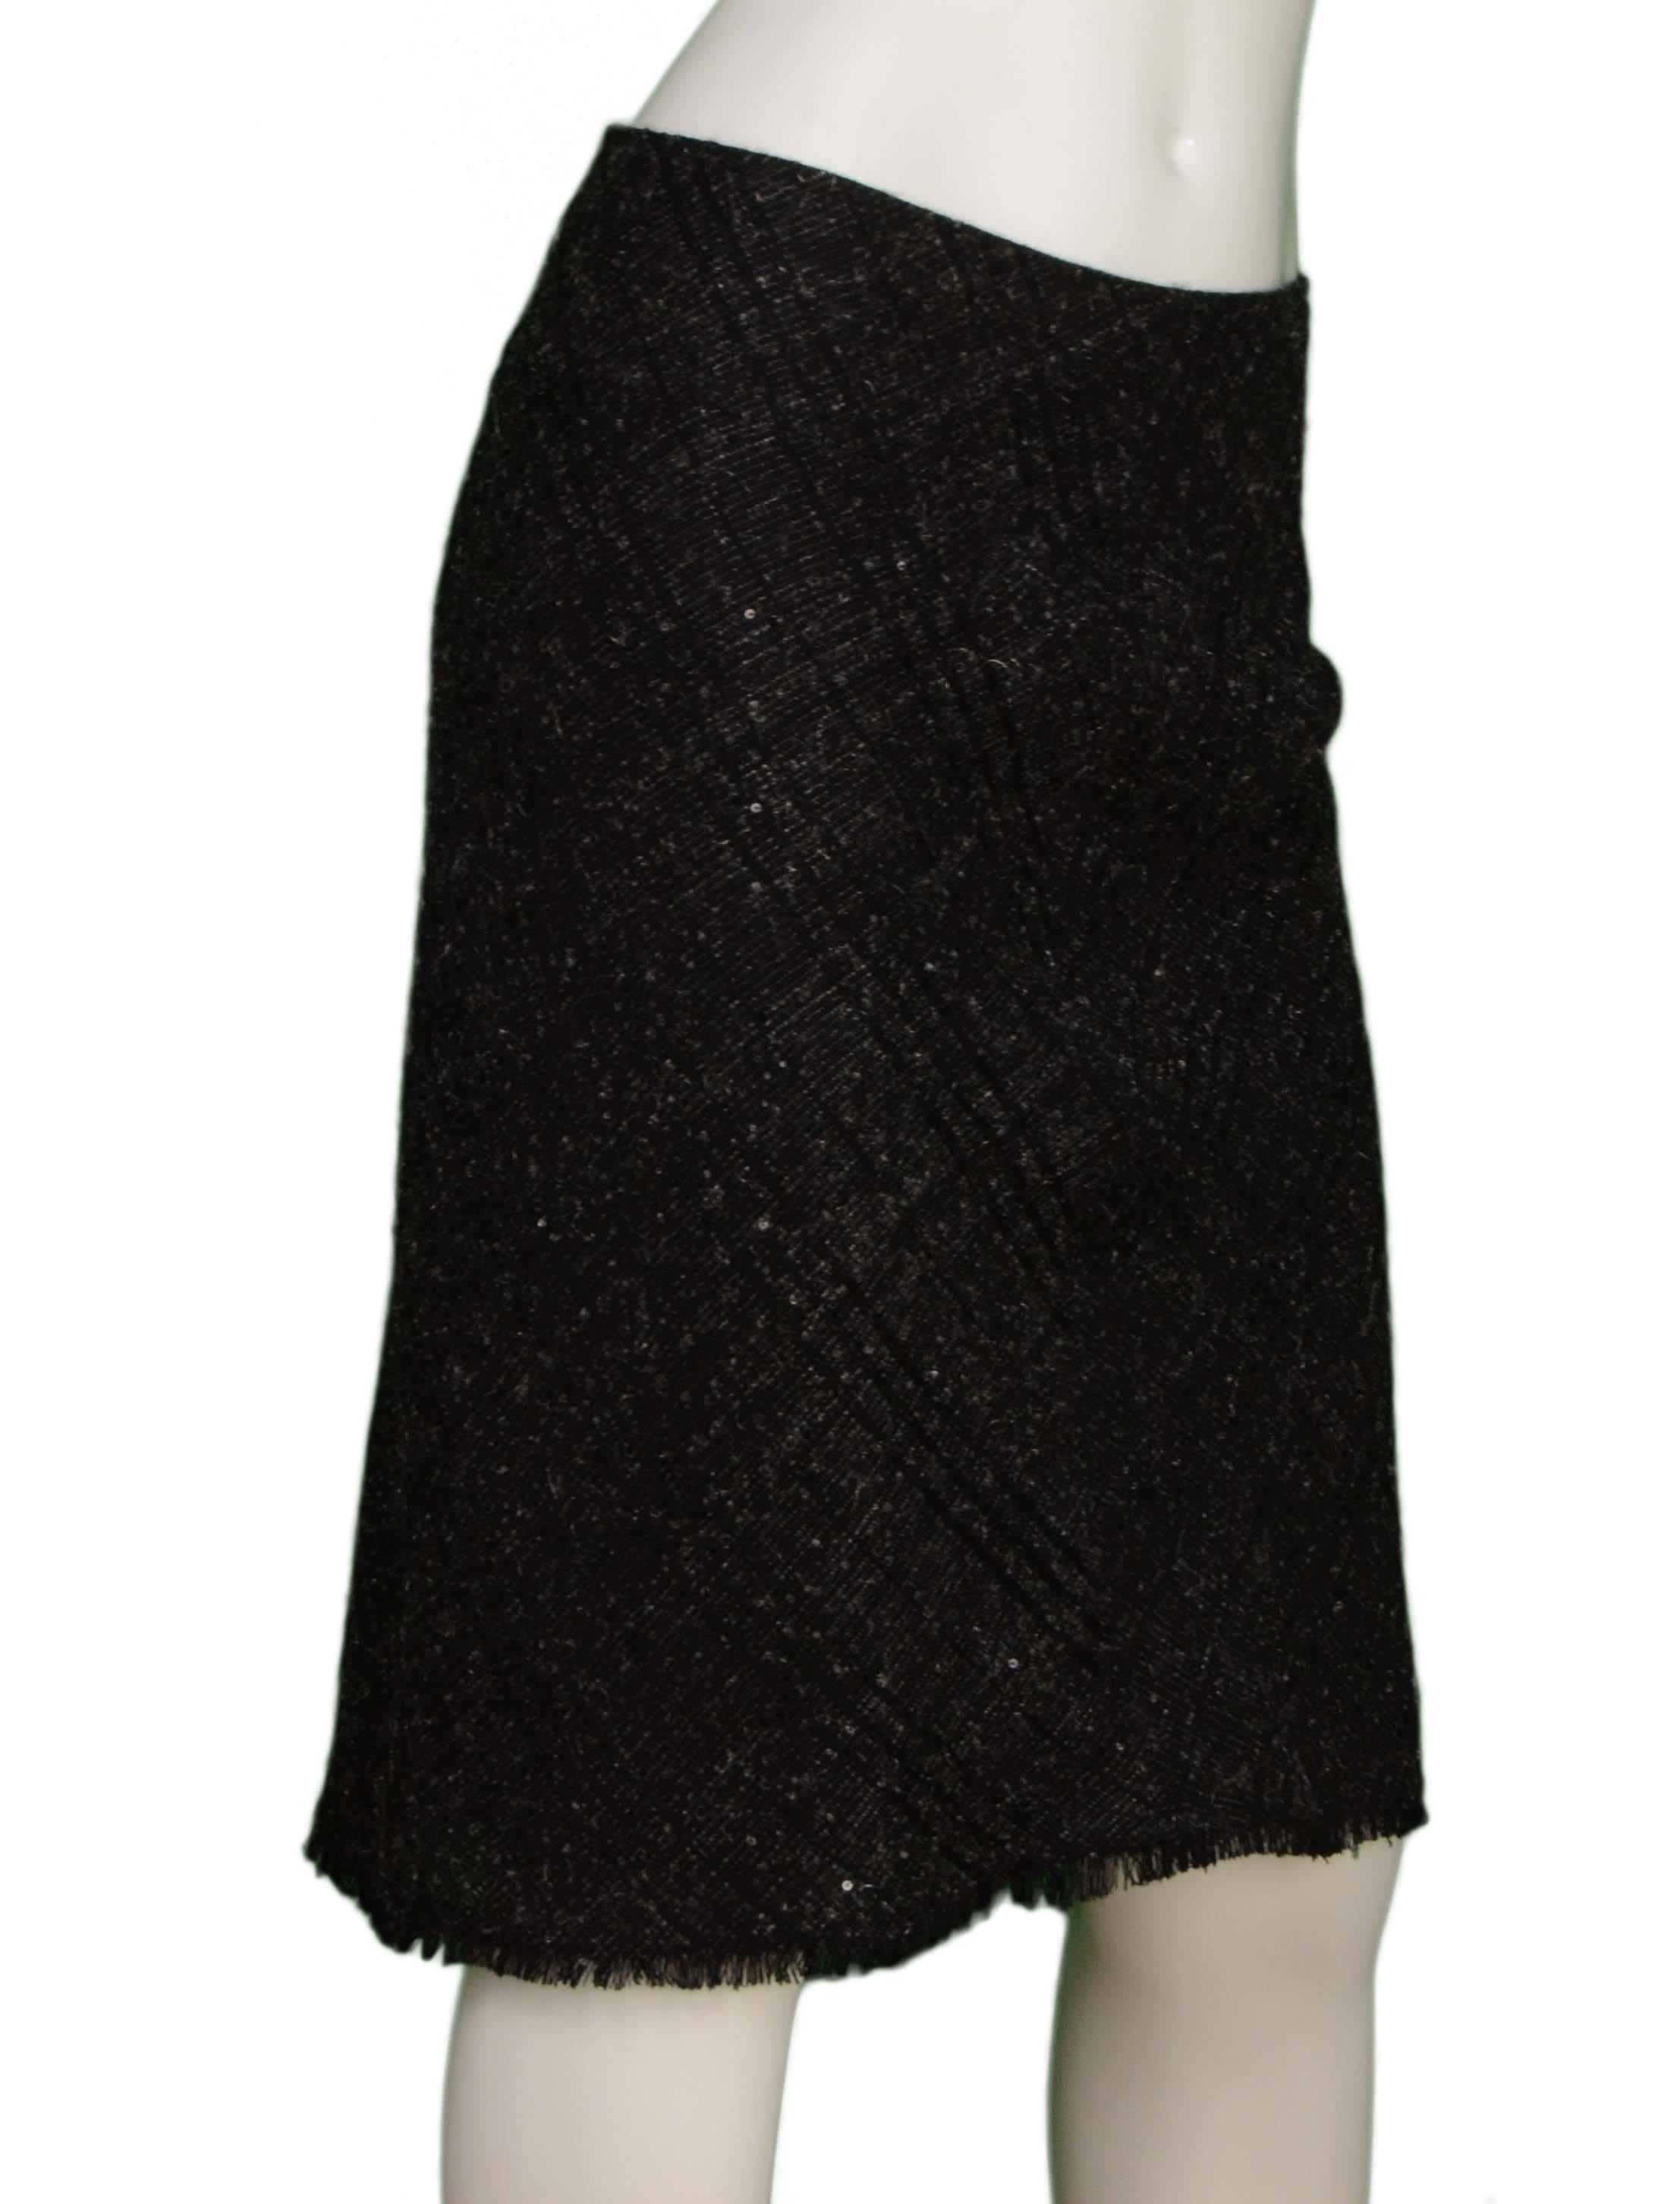 Burberry Black & Grey Wool Pencil Skirt 
Features small black sequins throughout
Made In: Italy
Color: Black and grey
Composition: 59% wool, 12% rayon, 11% polyamide, 11% mohair, 6% polyurethane, 1% cotton
Lining: Black, 93% cupro, 7%